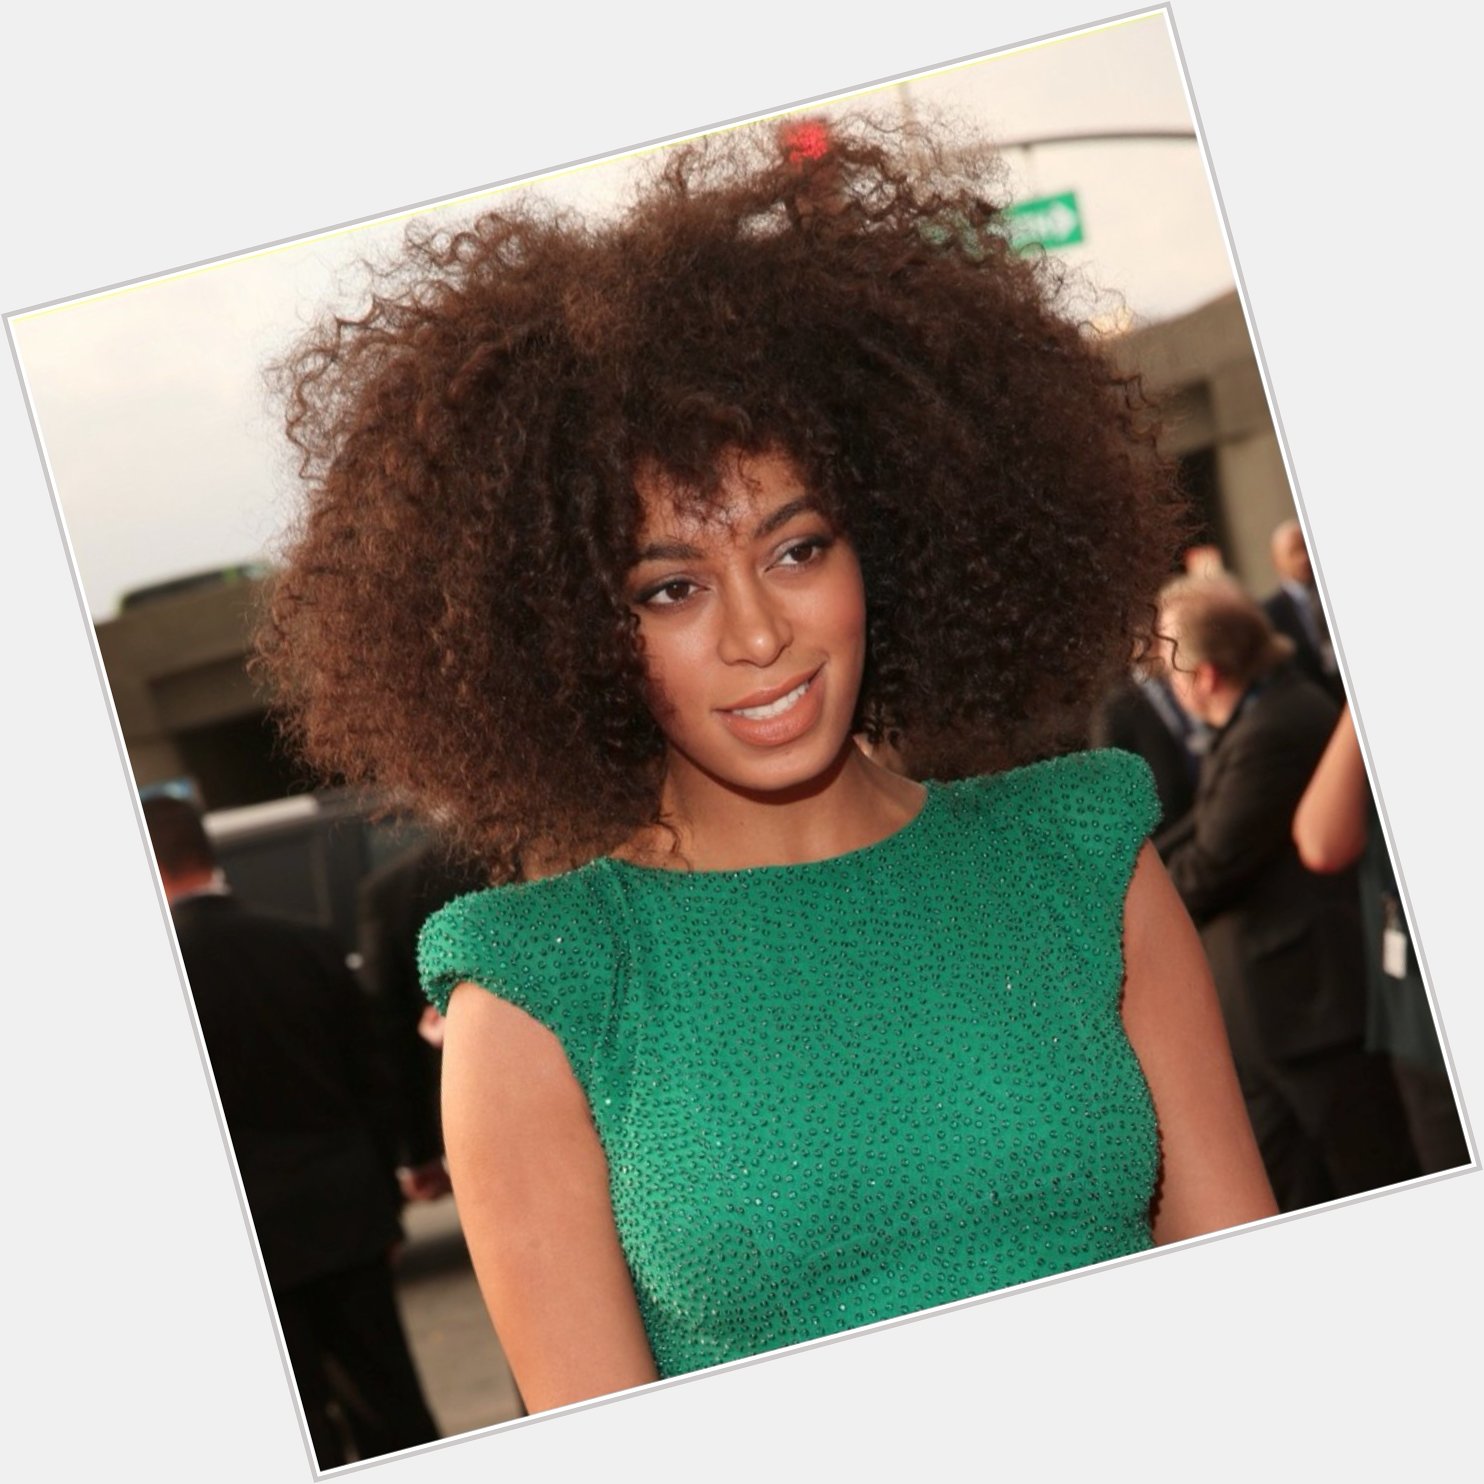 Happy Birthday to Solange Knowles who turns 31 today! 